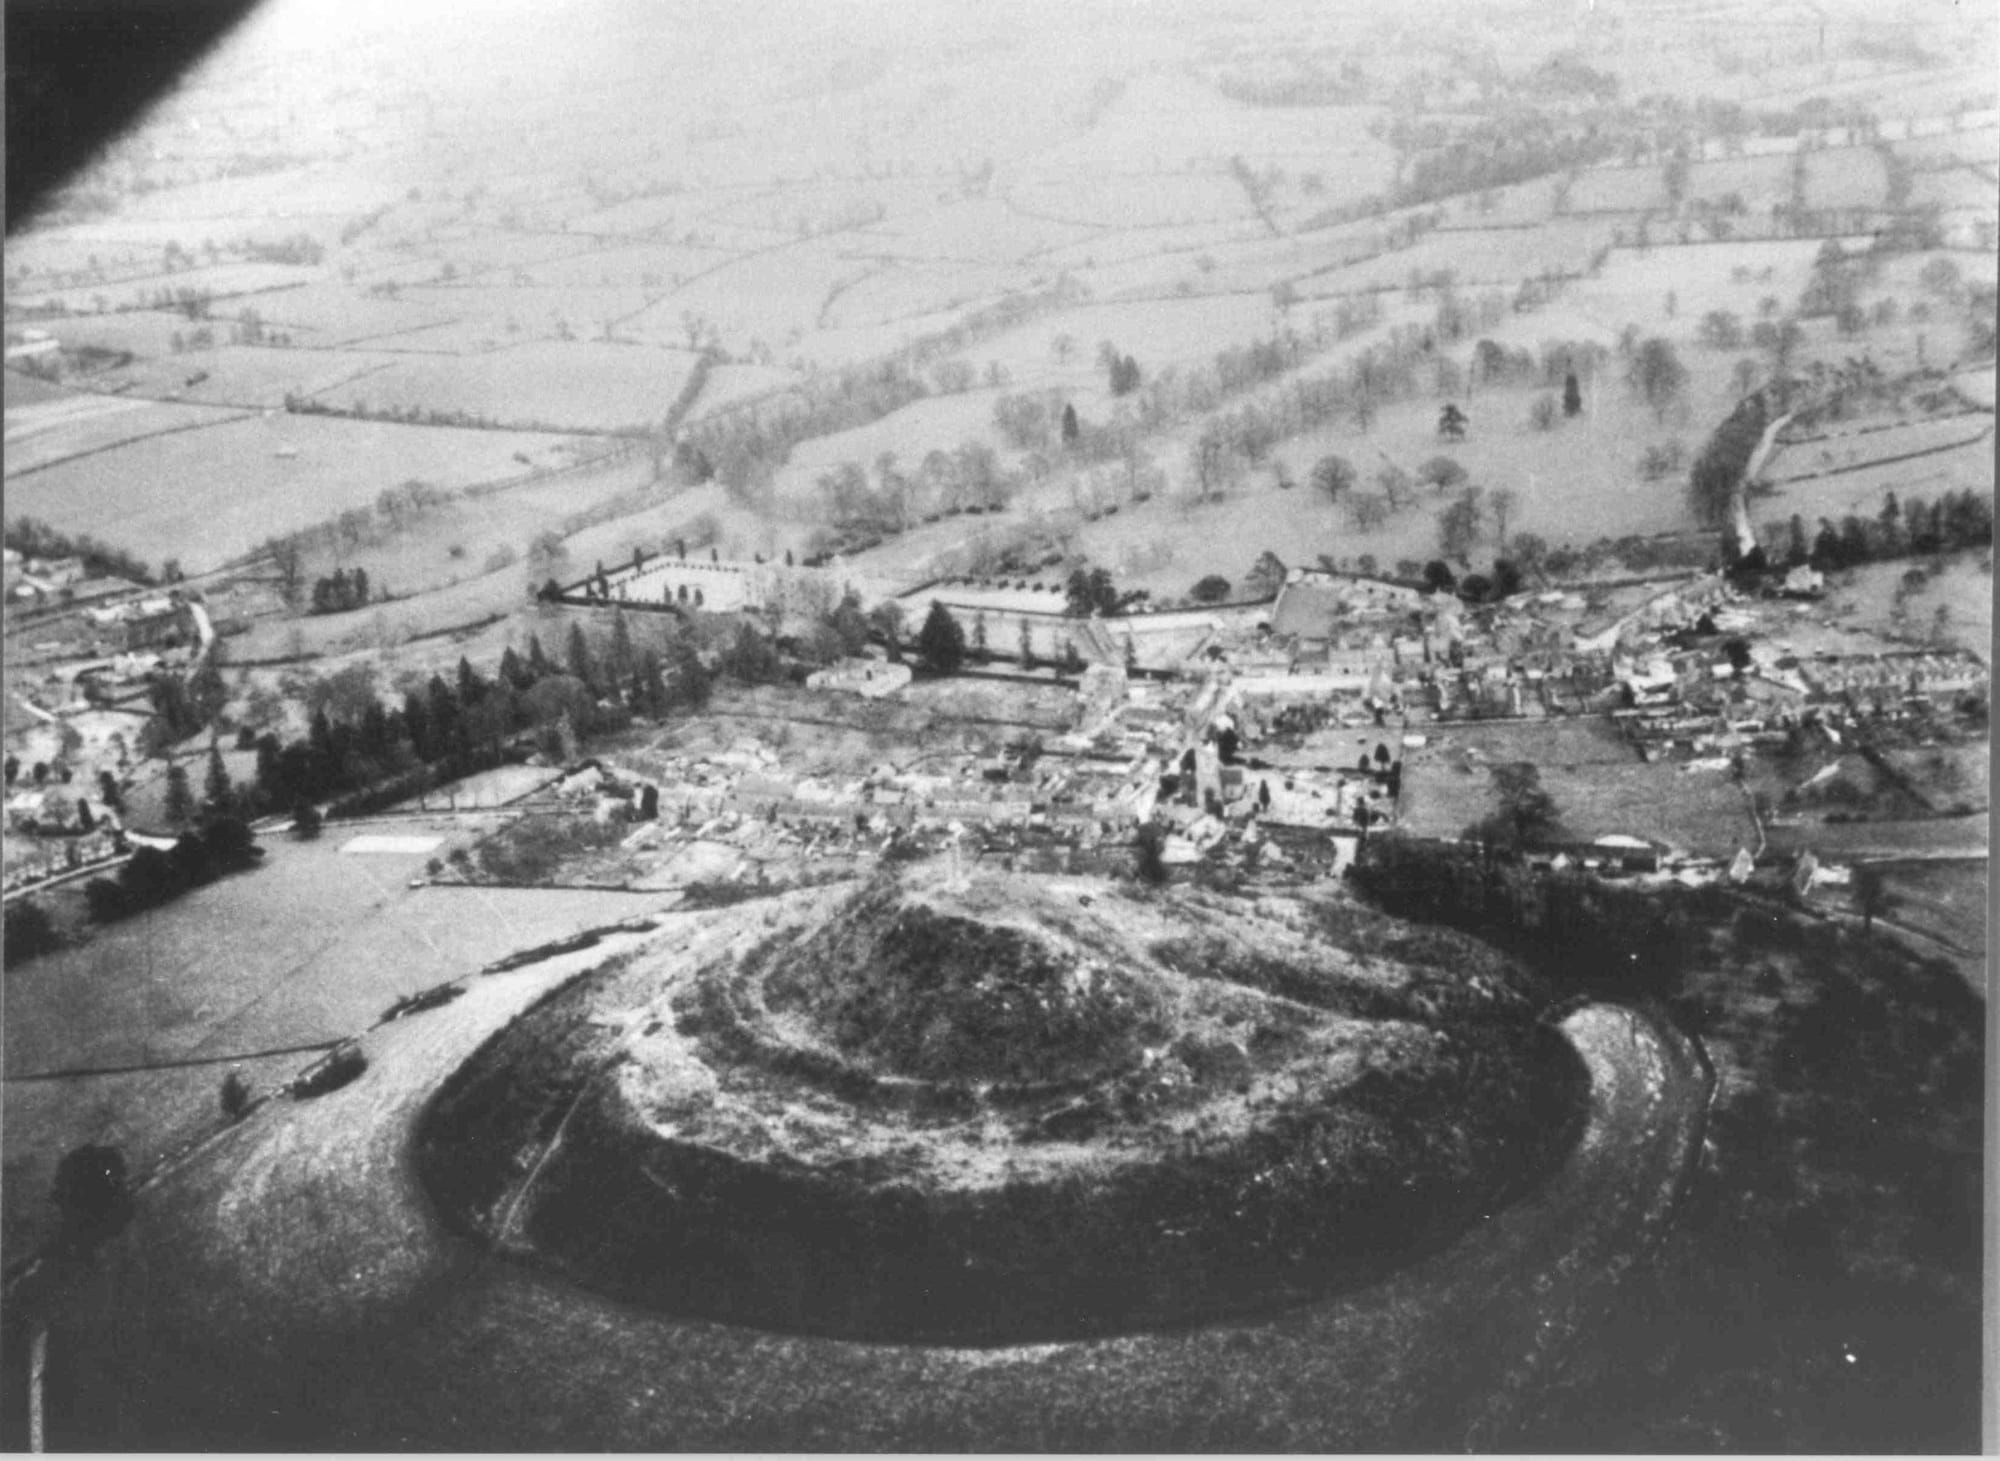 black and white photo taken from above Hedgecock Hill looking north-east across St Michael's Hill in the foreground and Montacute village and house in the background. The hill appears to have been recently cleared of all trees and shrubs